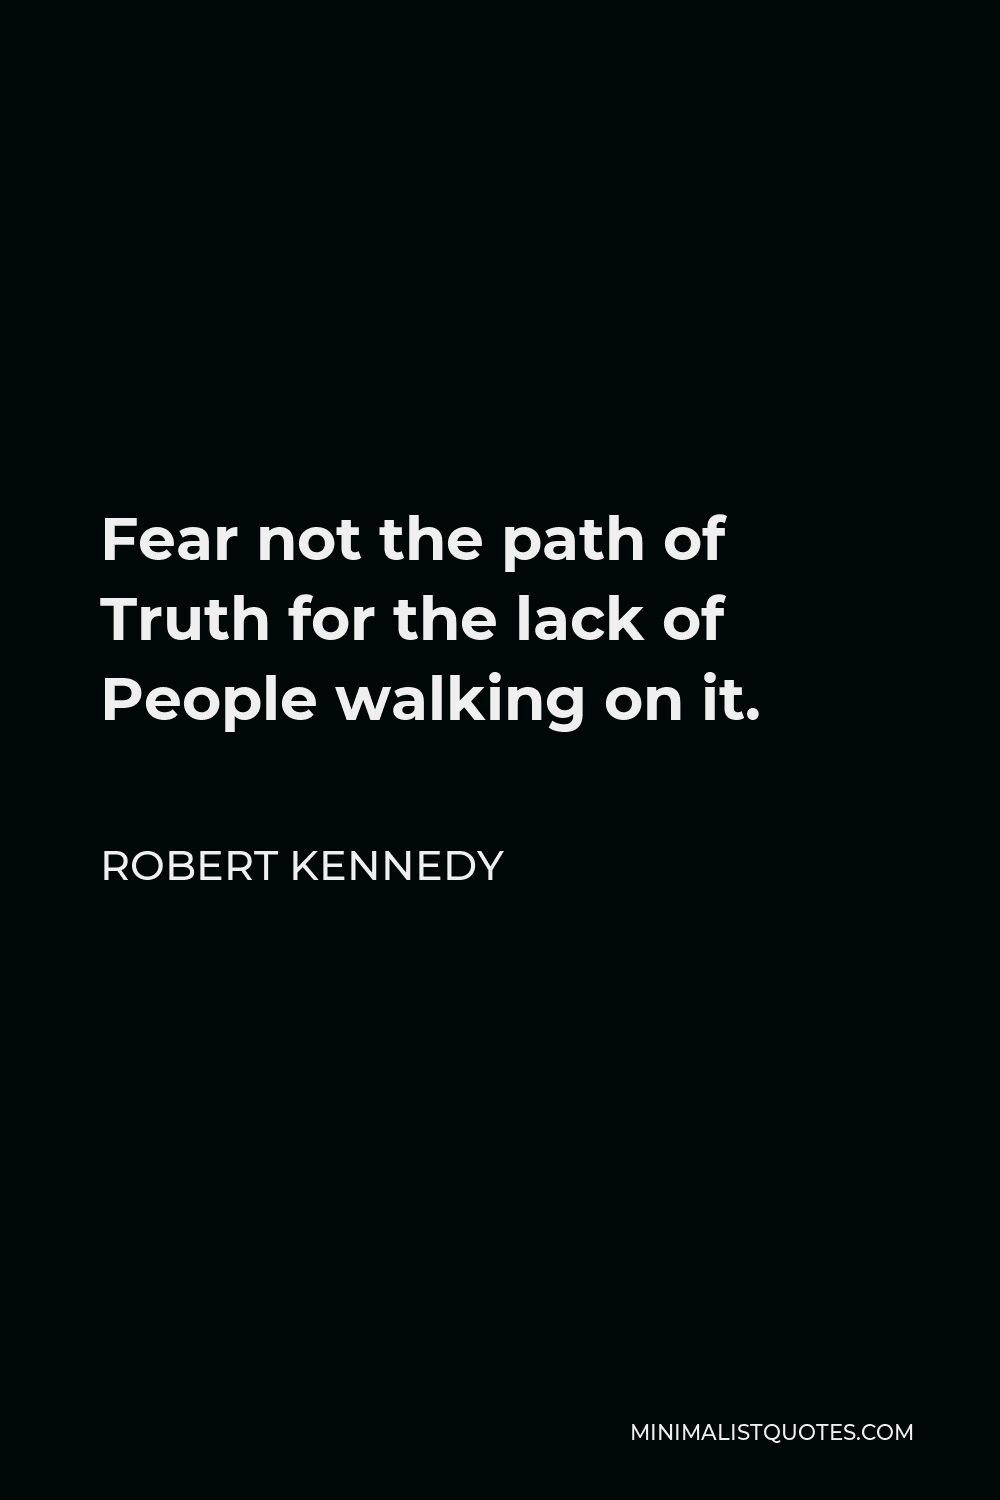 Robert Kennedy Quote - Fear not the path of Truth for the lack of People walking on it.